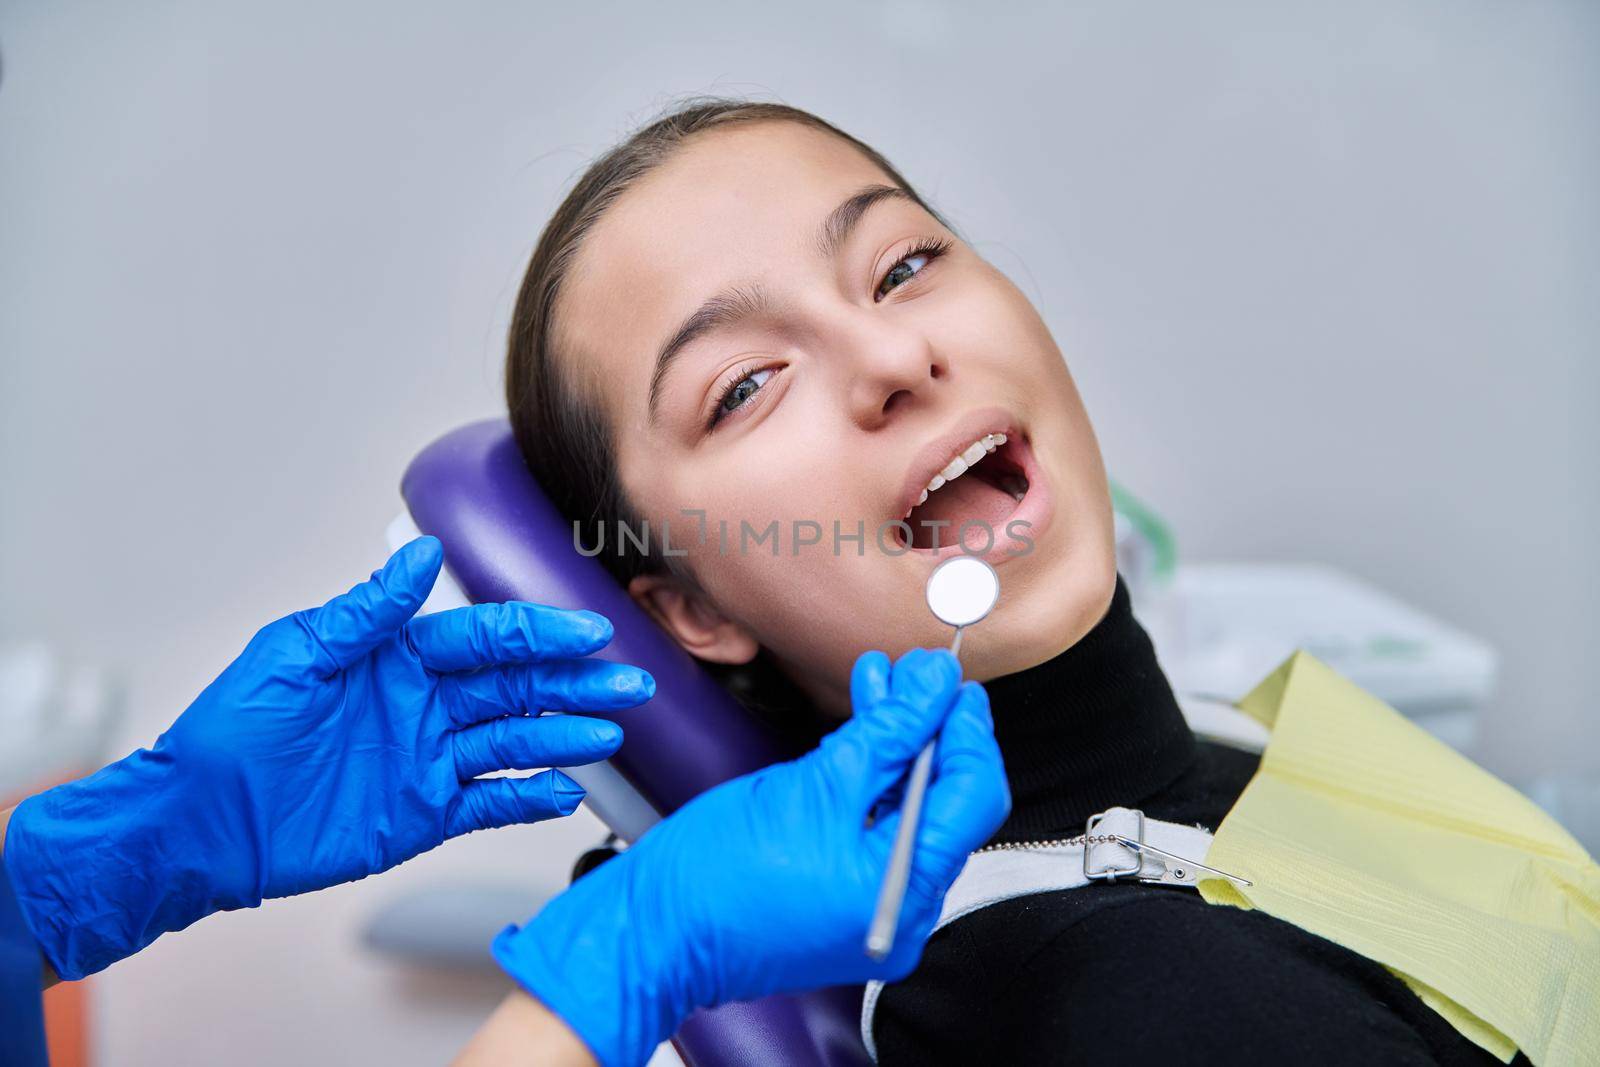 Young teenage female at dental checkup in clinic. Teenage girl sitting in chair, doctor dentist with tools examining patient's teeth. Adolescence, hygiene, dentistry, treatment, dental health care